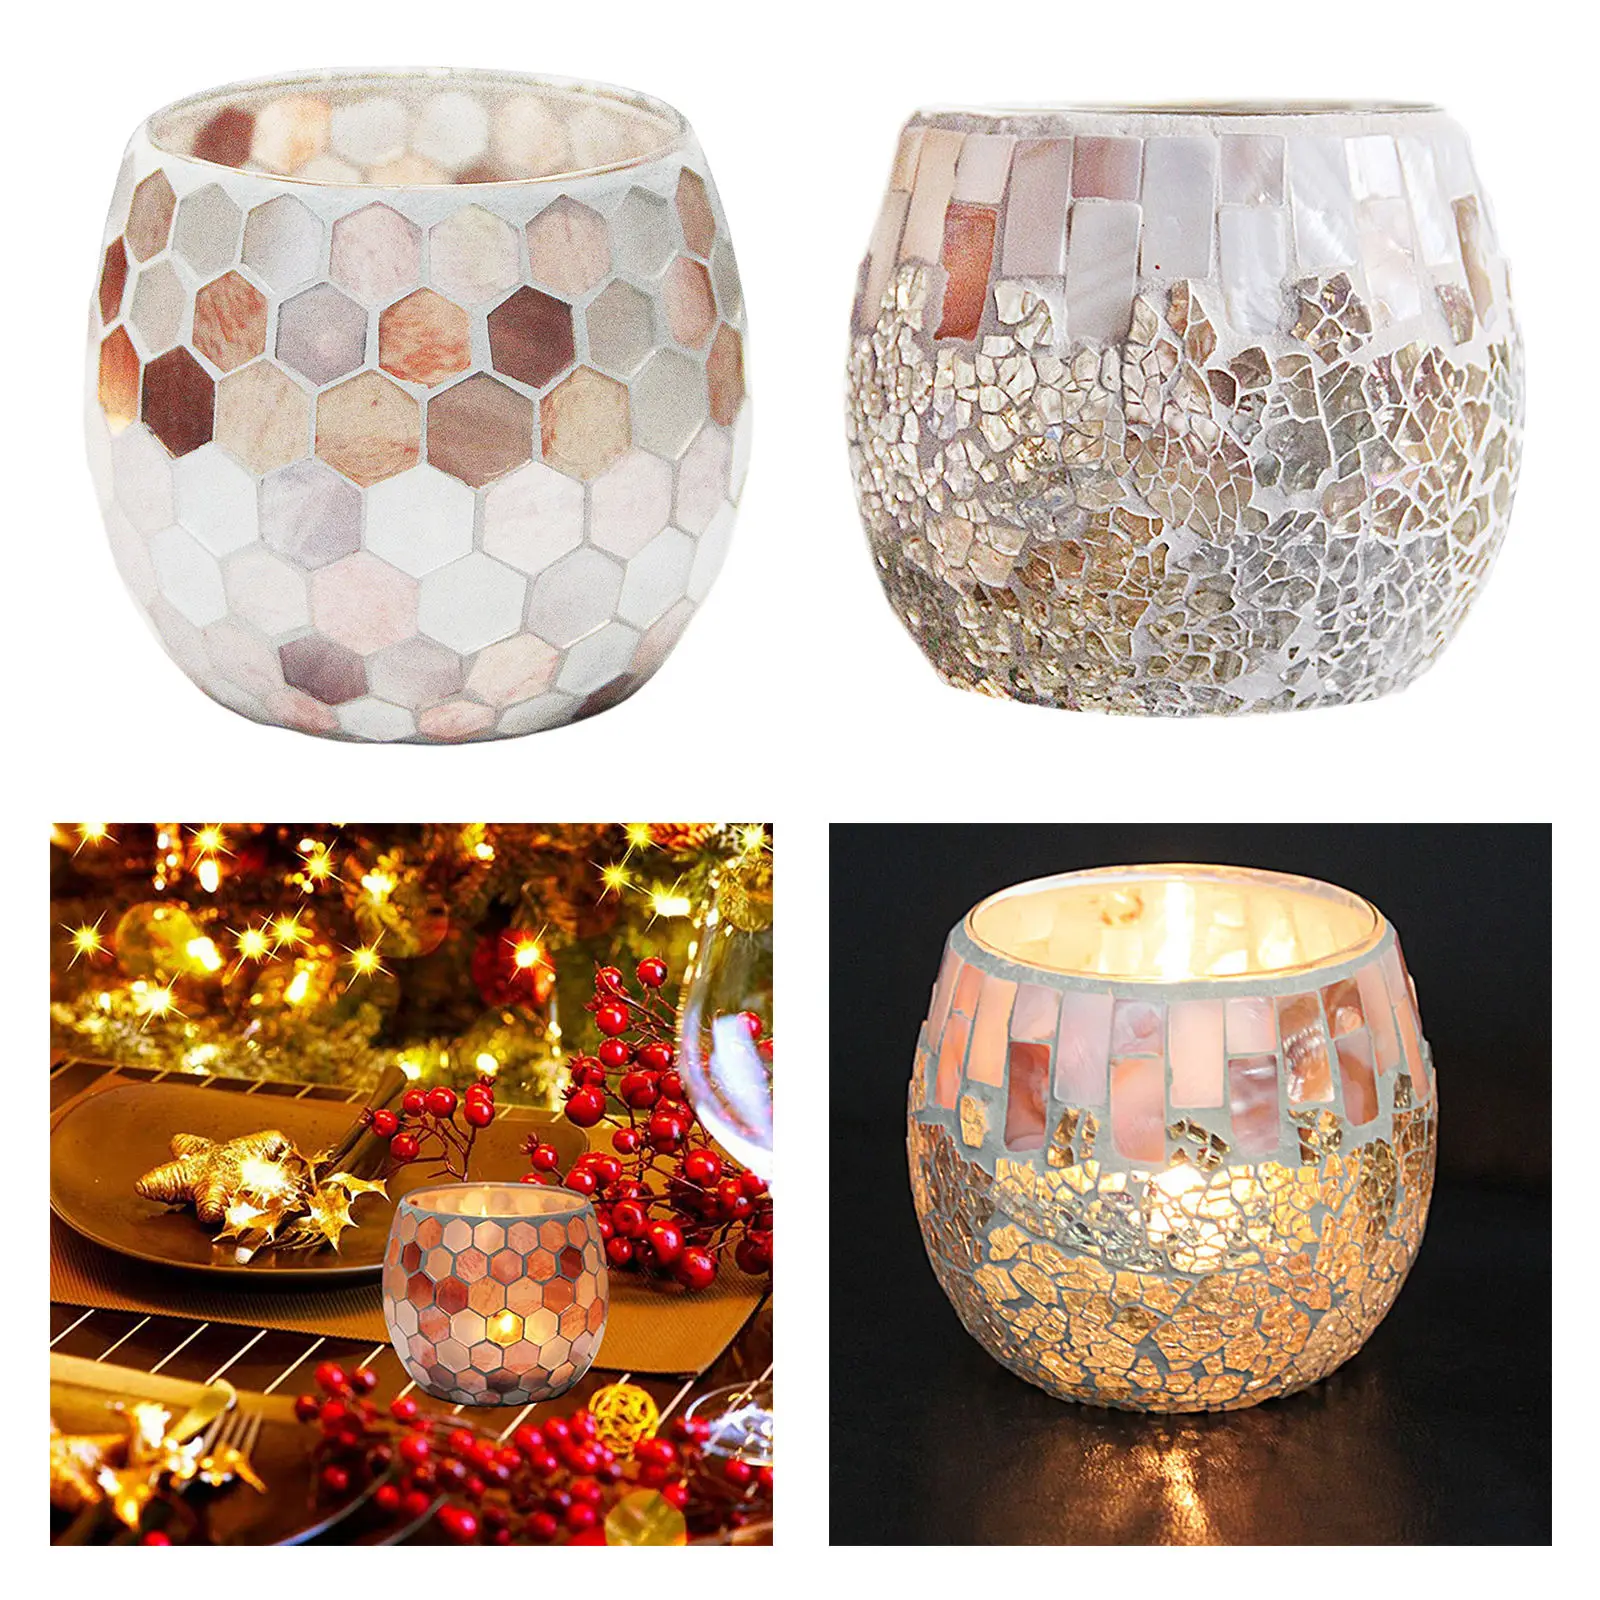 Mosaic Glass Candle Holder Centerpiece Jar Tealight Holders Vase Potted Plants Bowl Pen Holder Wedding Party Home Decor Gifts